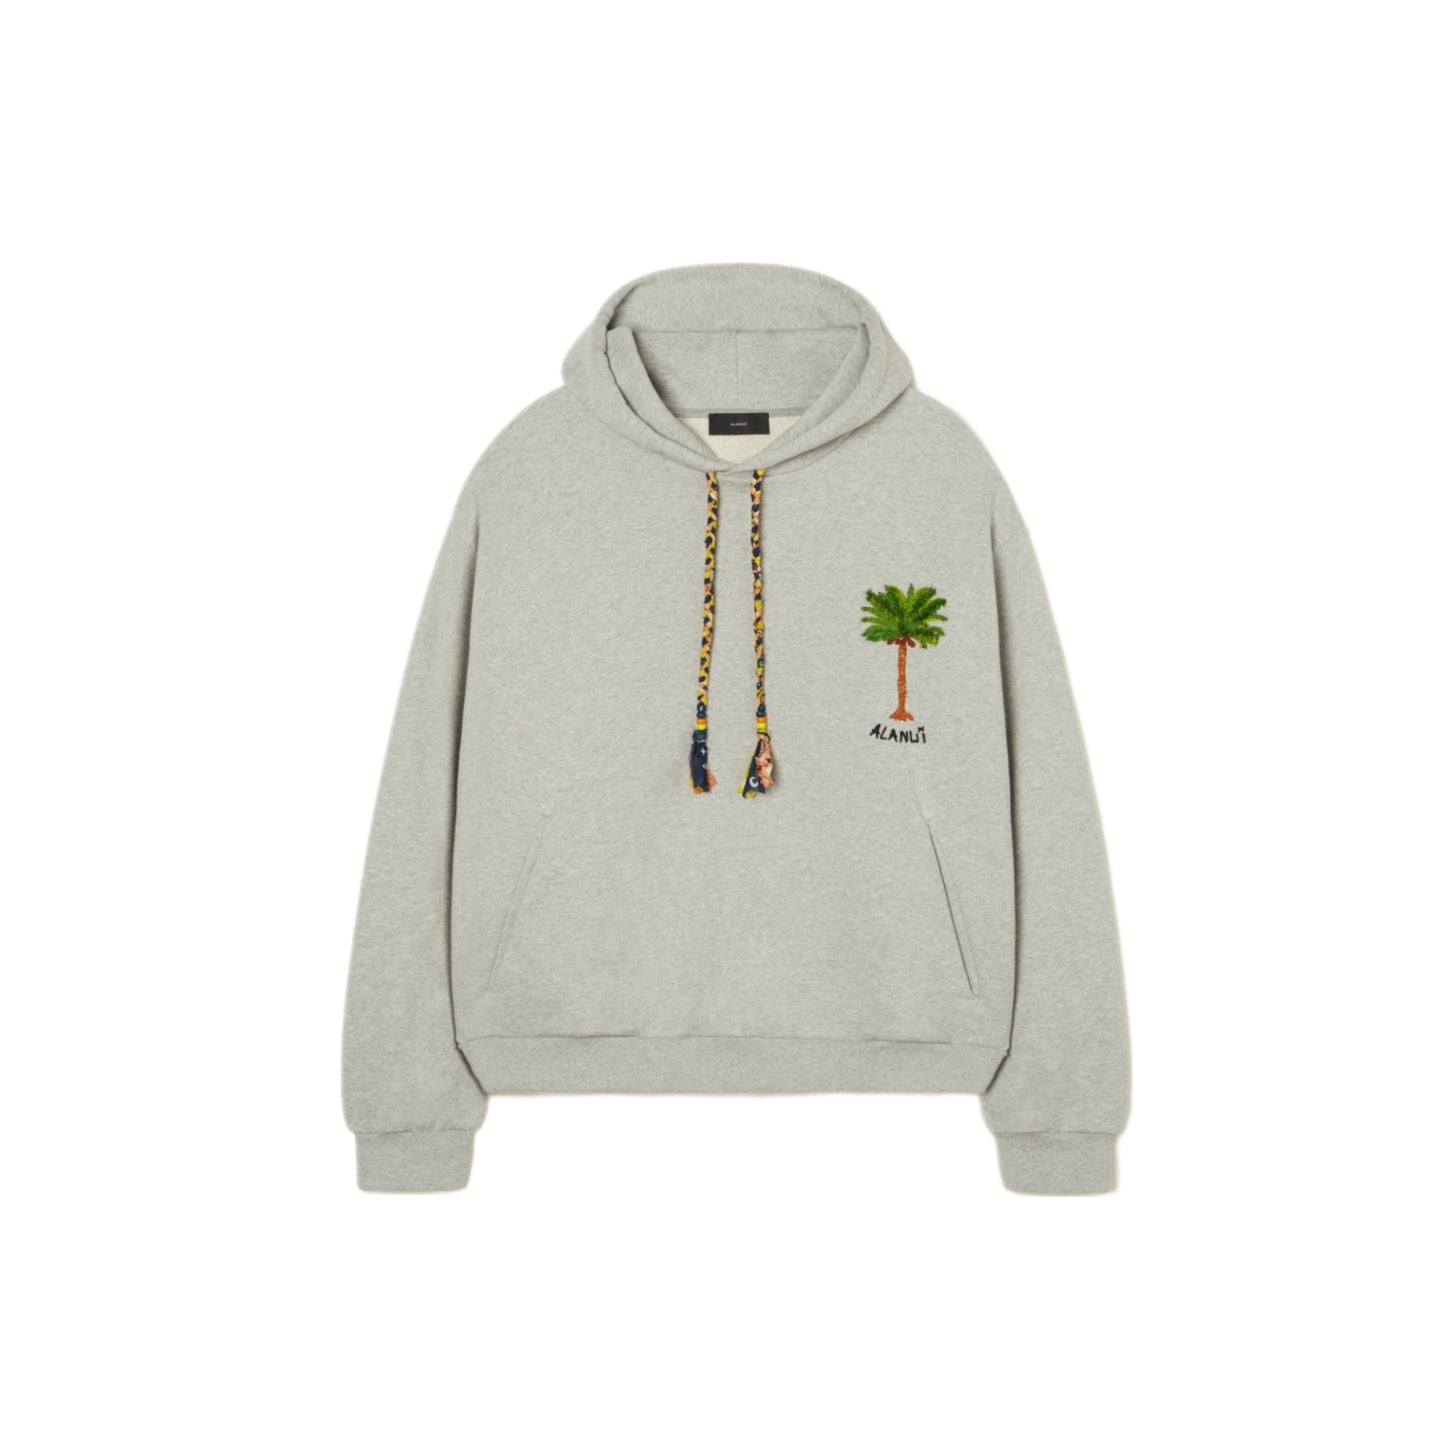 STAY POSITIVE EMBROIDERED HOODIE